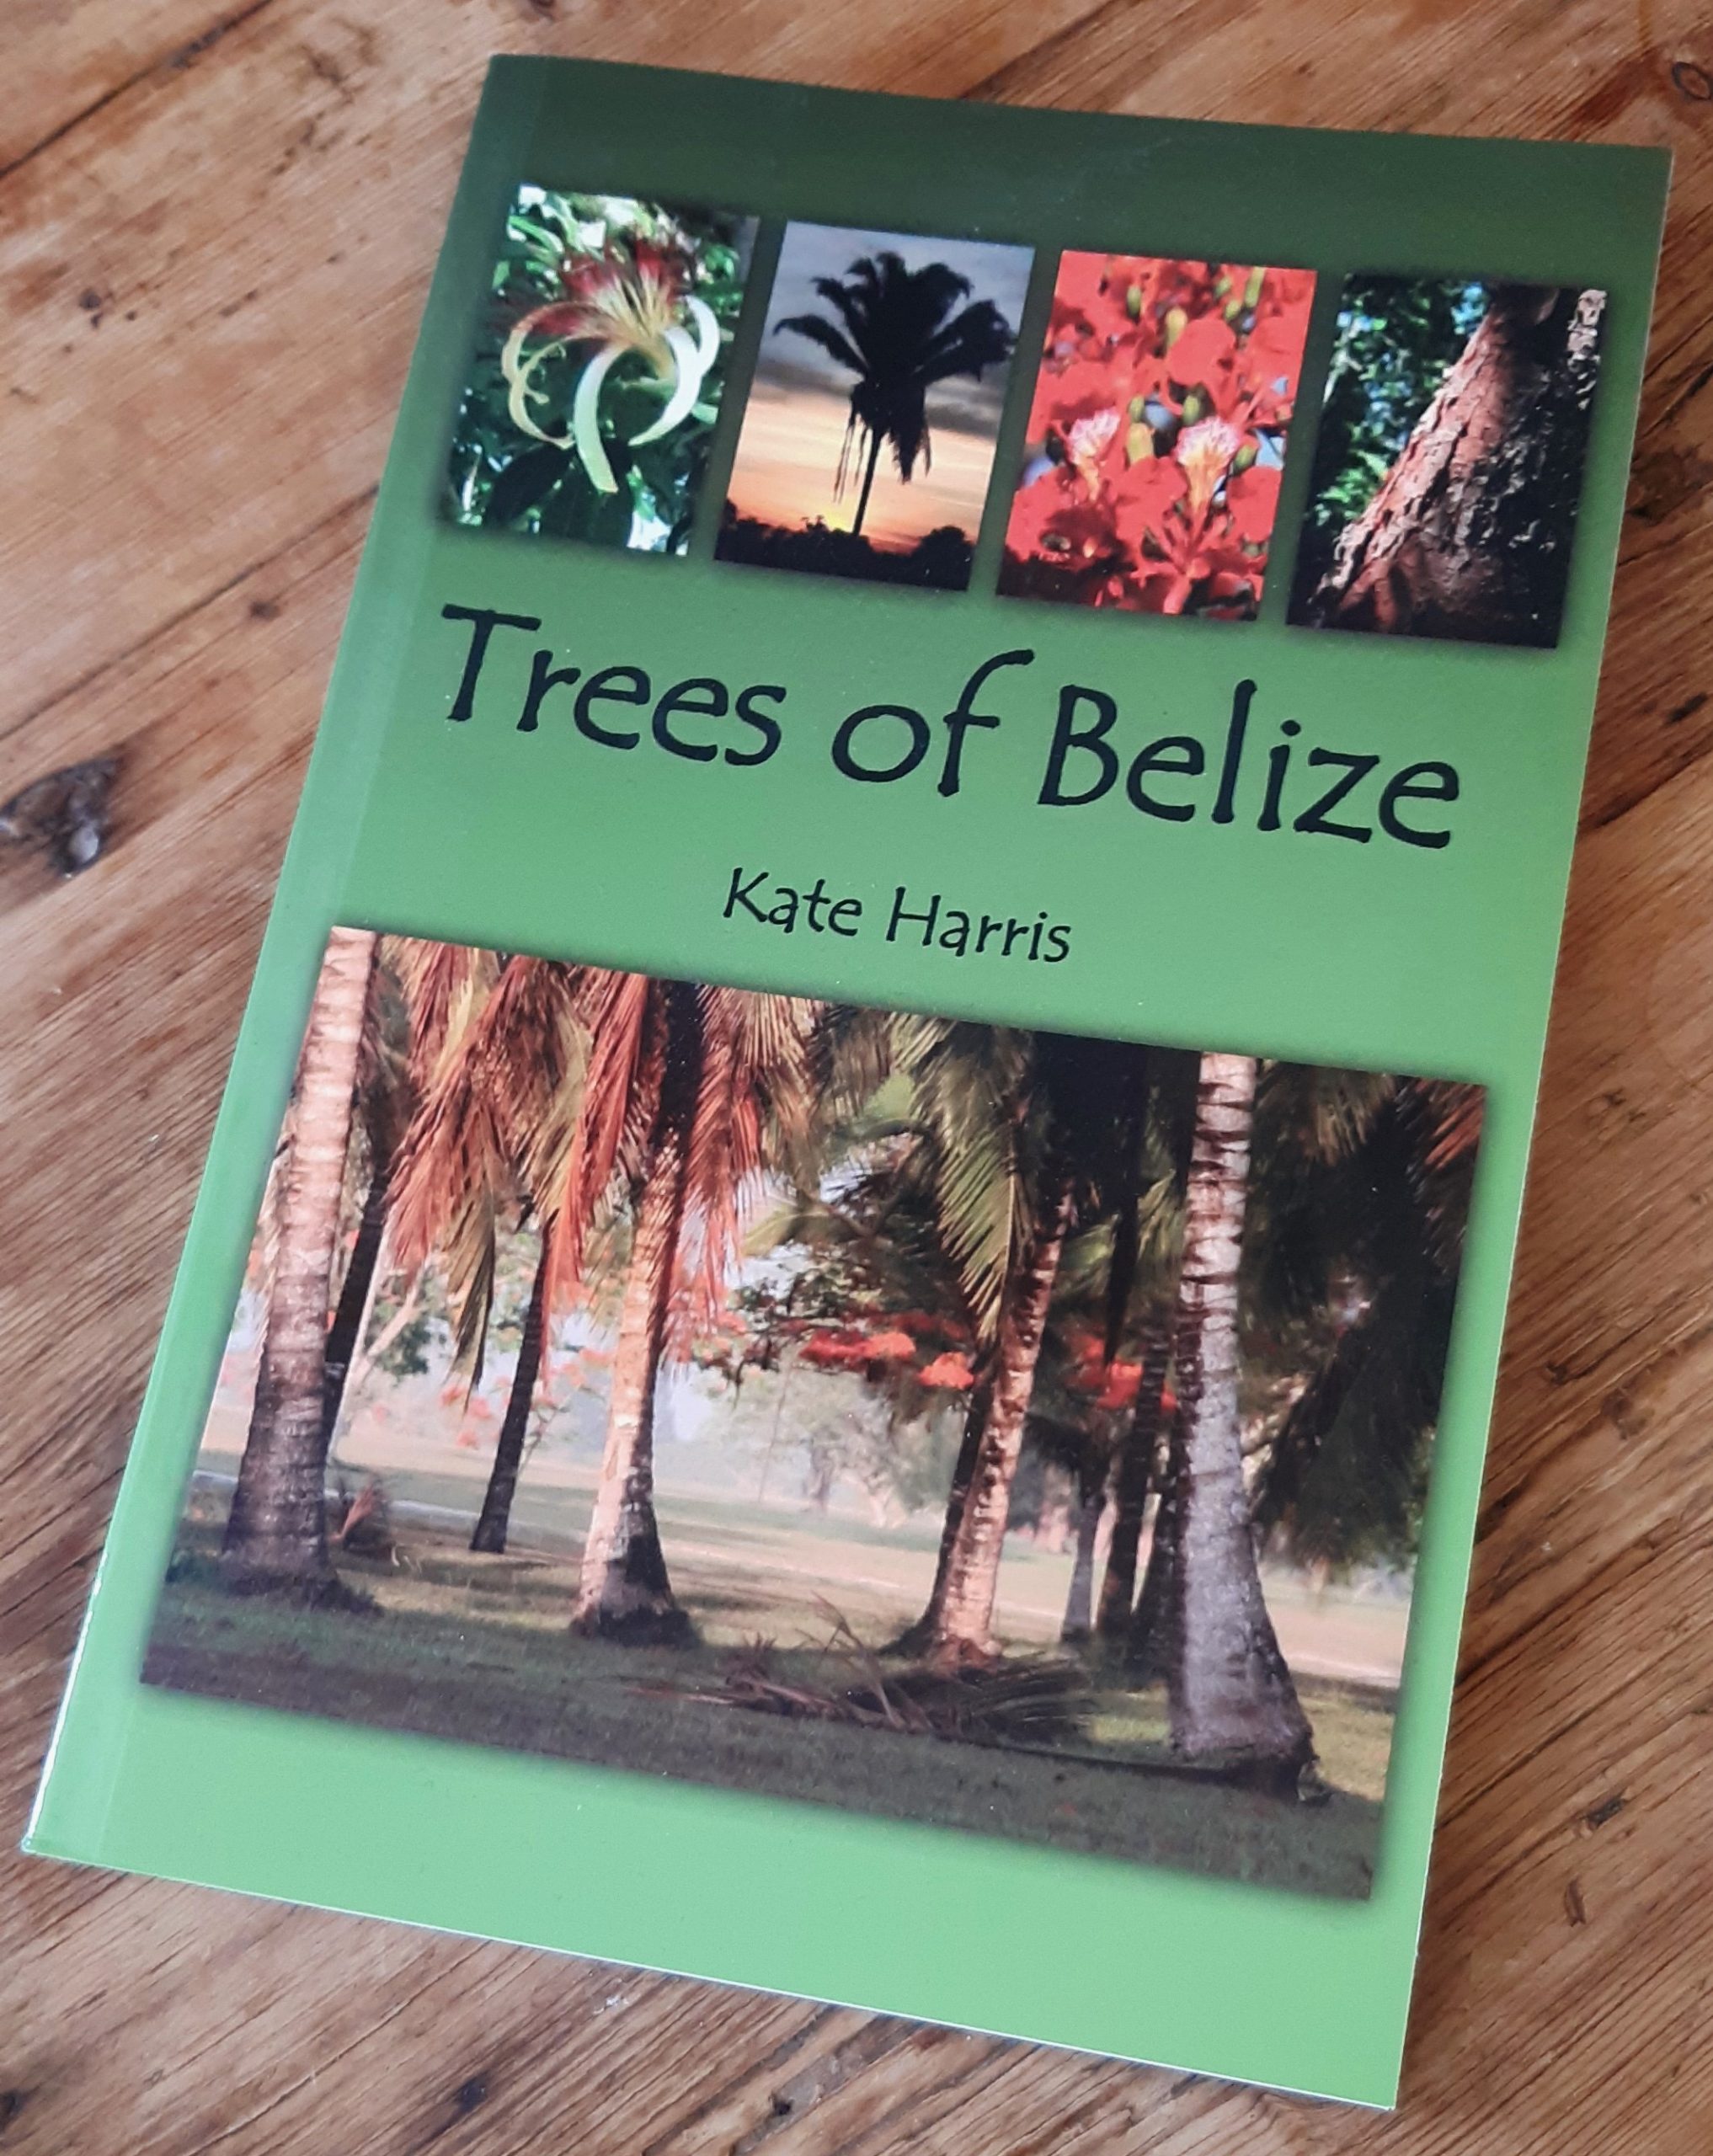 The cover of Kate Harris' book 'Trees of Belize'